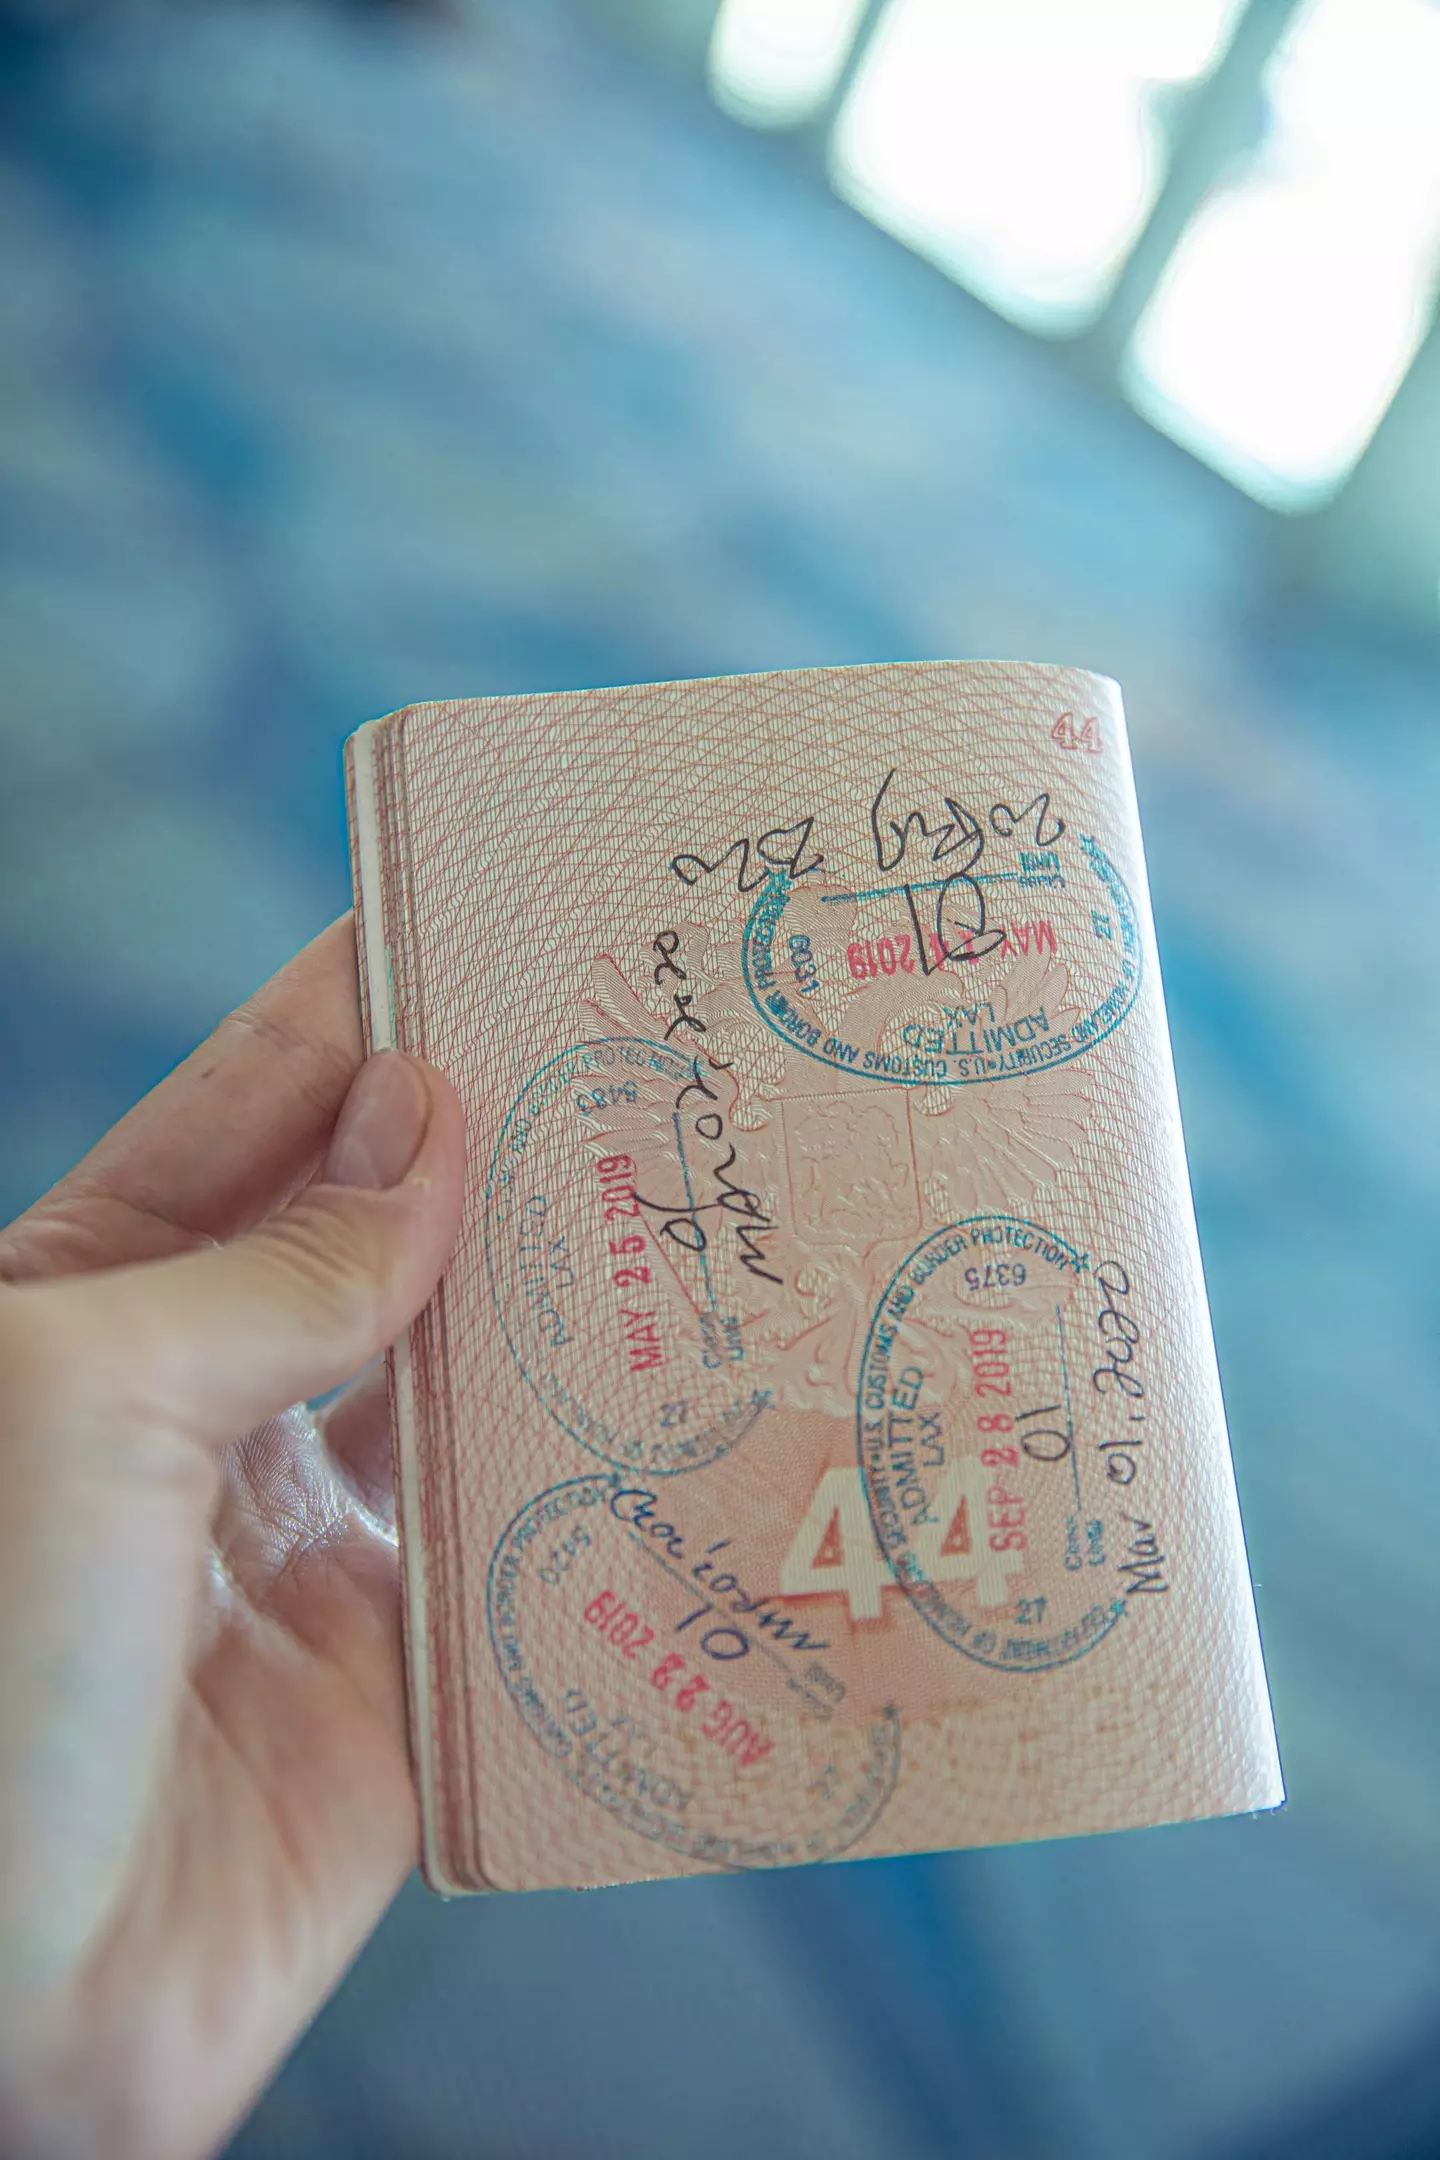 The woman was told her passport was too dirty to fly. (Stock image)